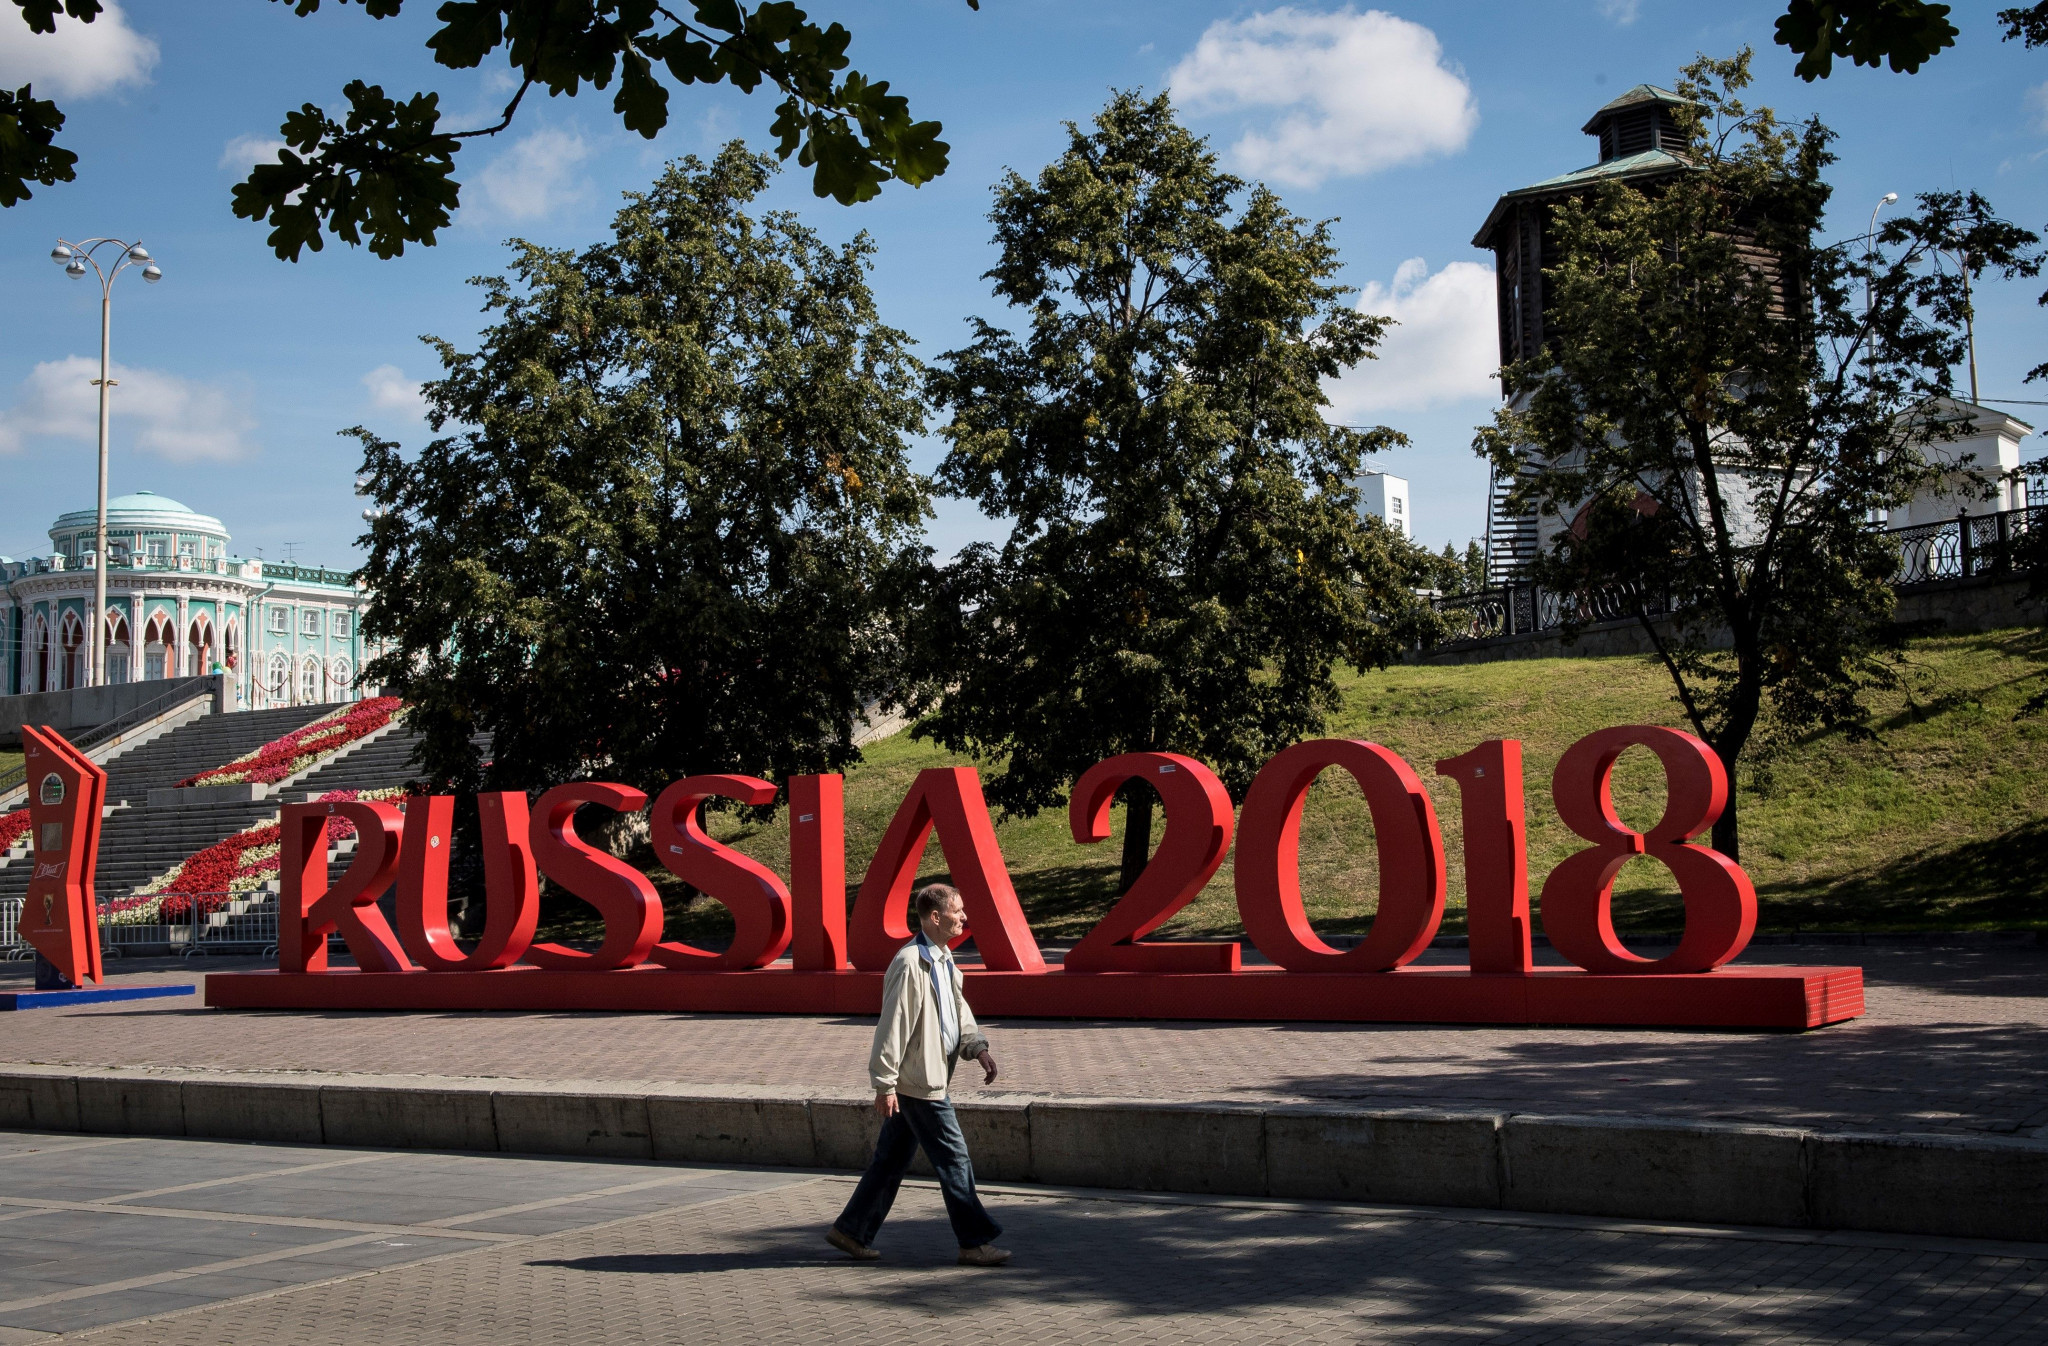 Talk of a boycott of Russia 2018 has occurred in Britain after the poisoning of a former spy ©Getty Images